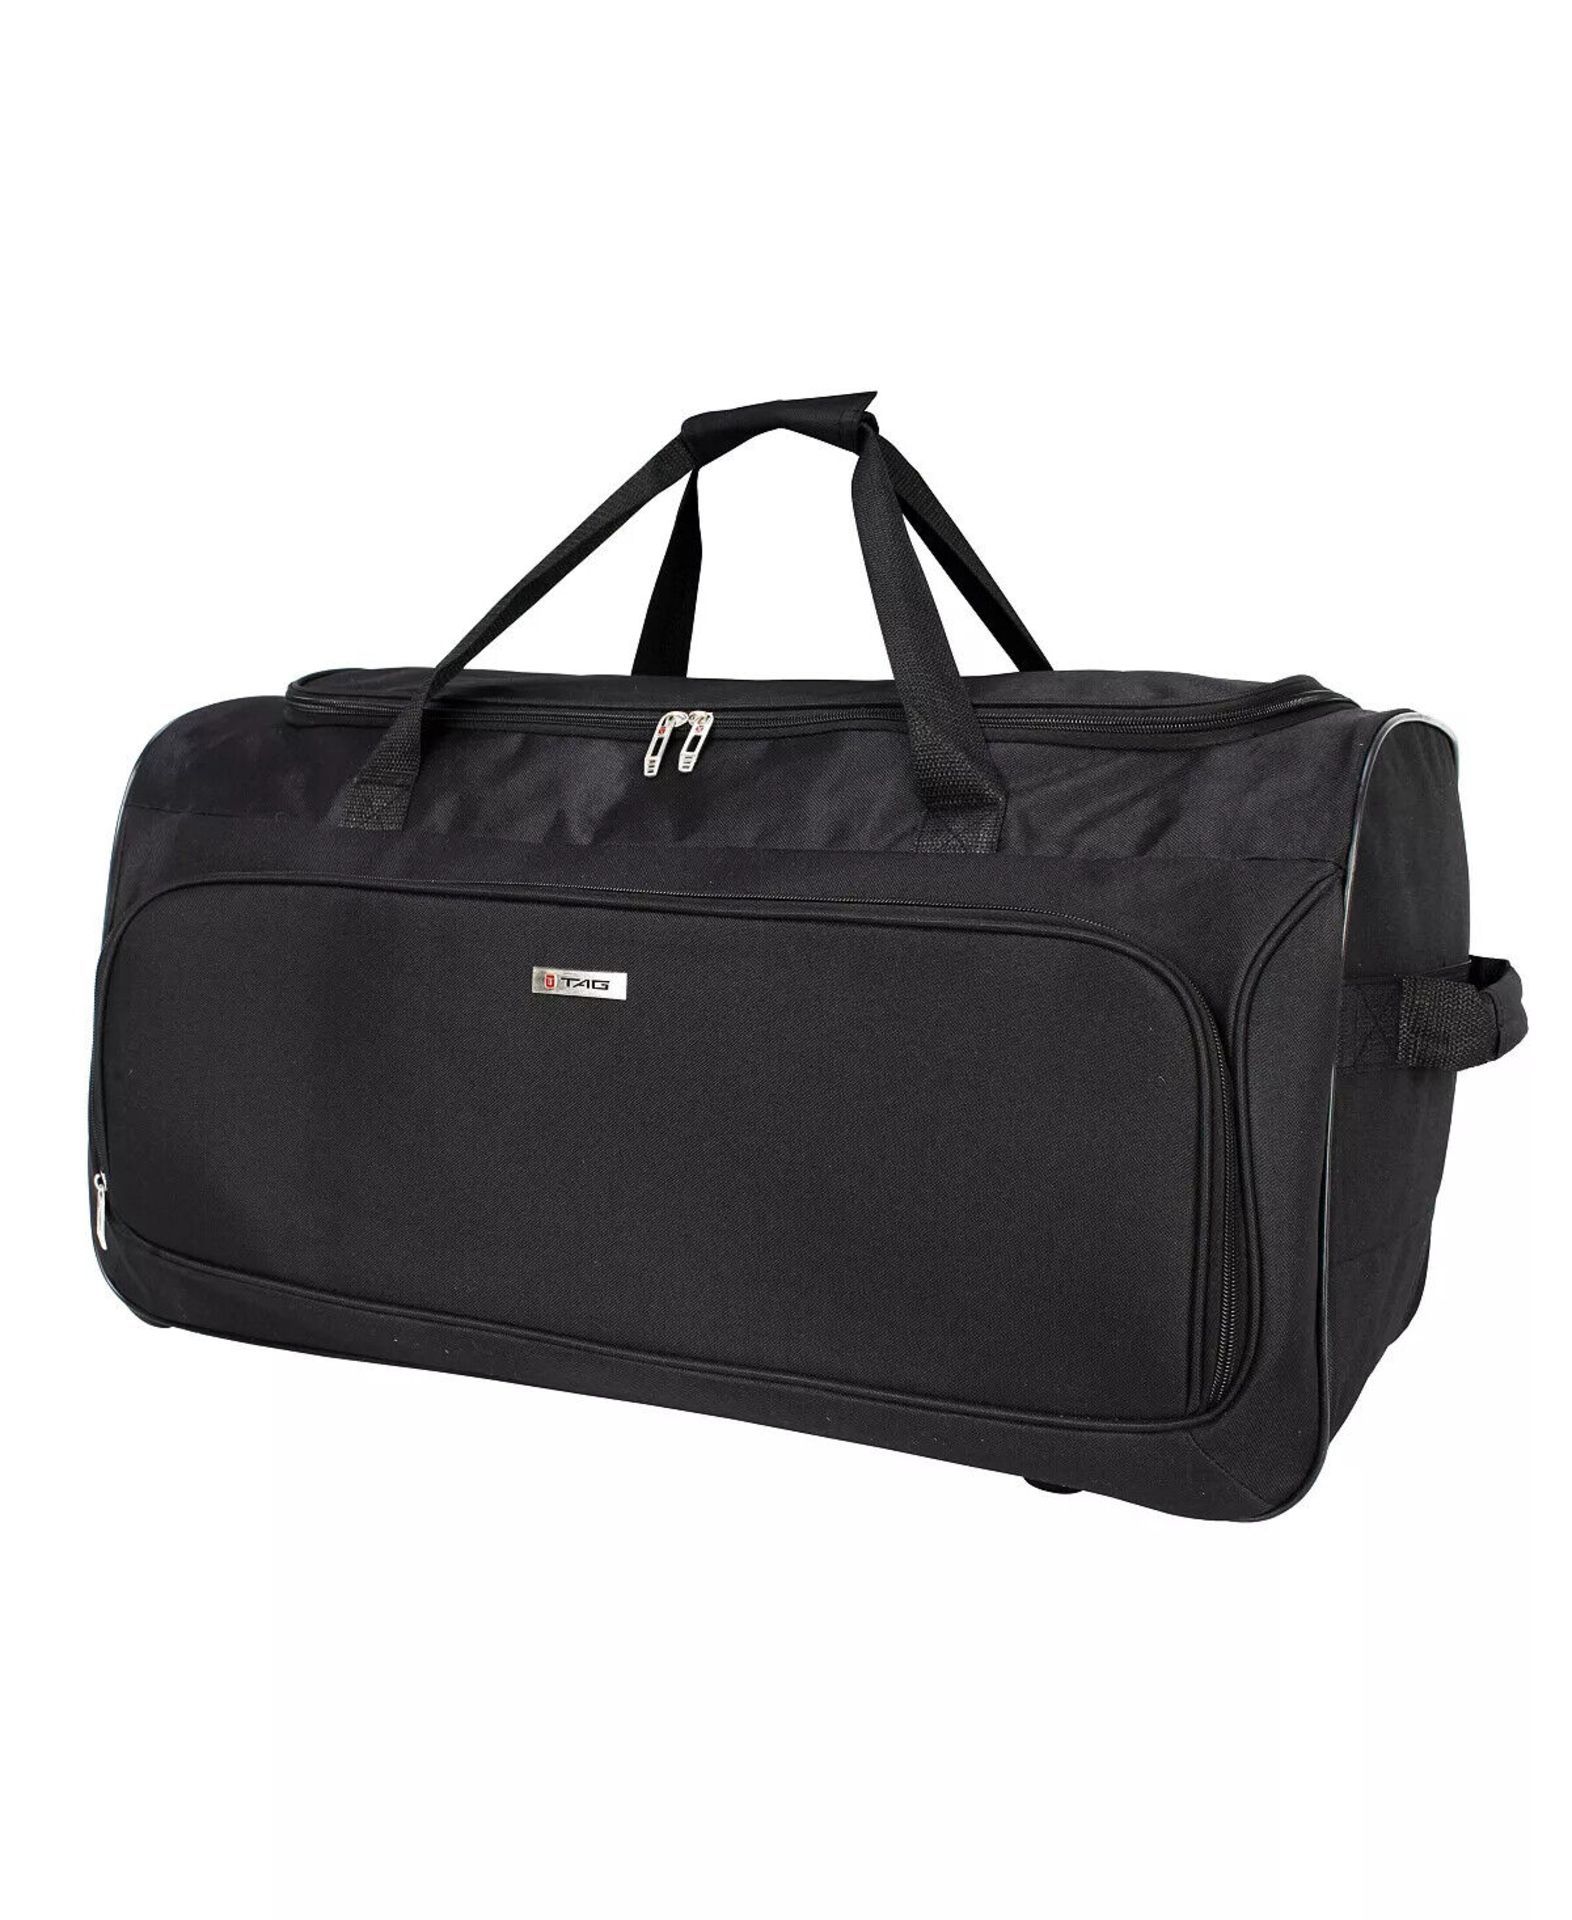 New Set OF TAG Ridgefield Black 5 Piece Softside Luggage Set. RRP $300. This classic set from Tag - Image 3 of 4